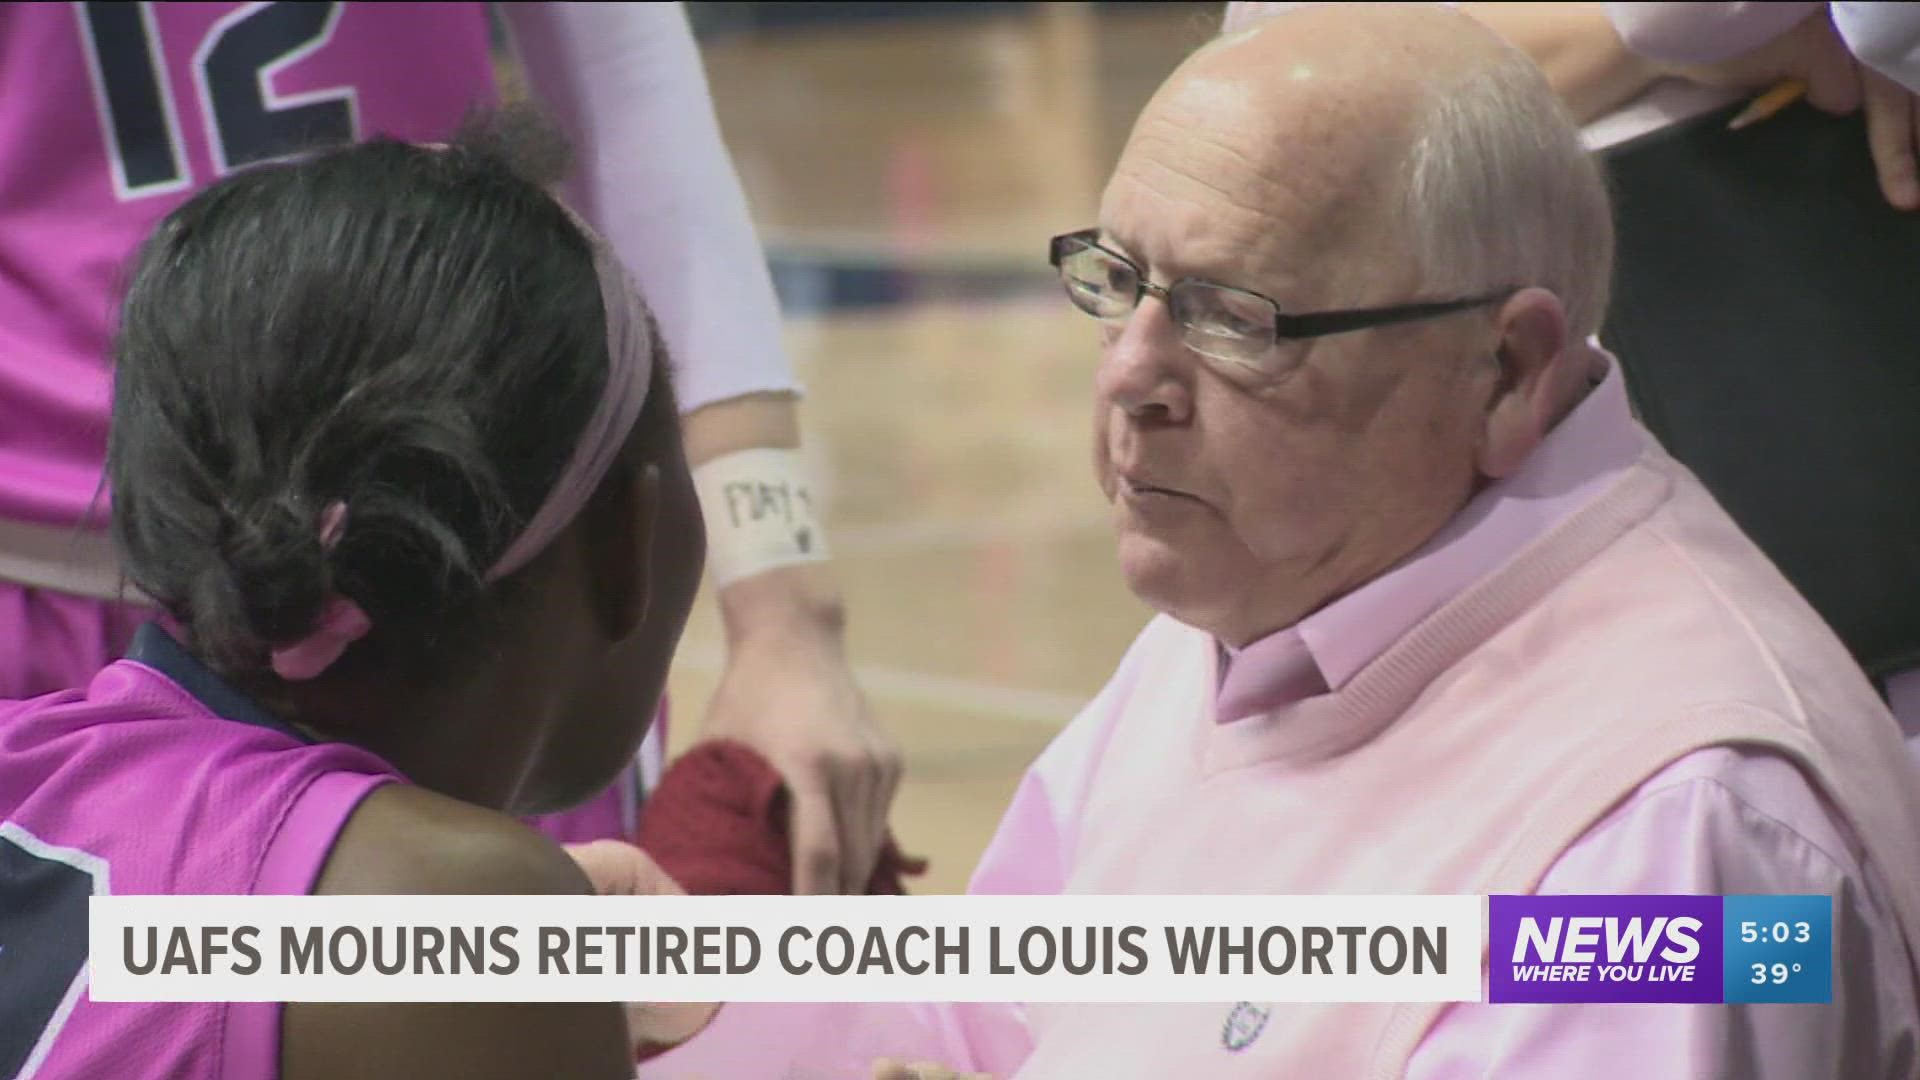 Whorton compiled a 648-277 win-loss recorded over 30 years of coaching, making him the most successful women's basketball coach in UAFS history.